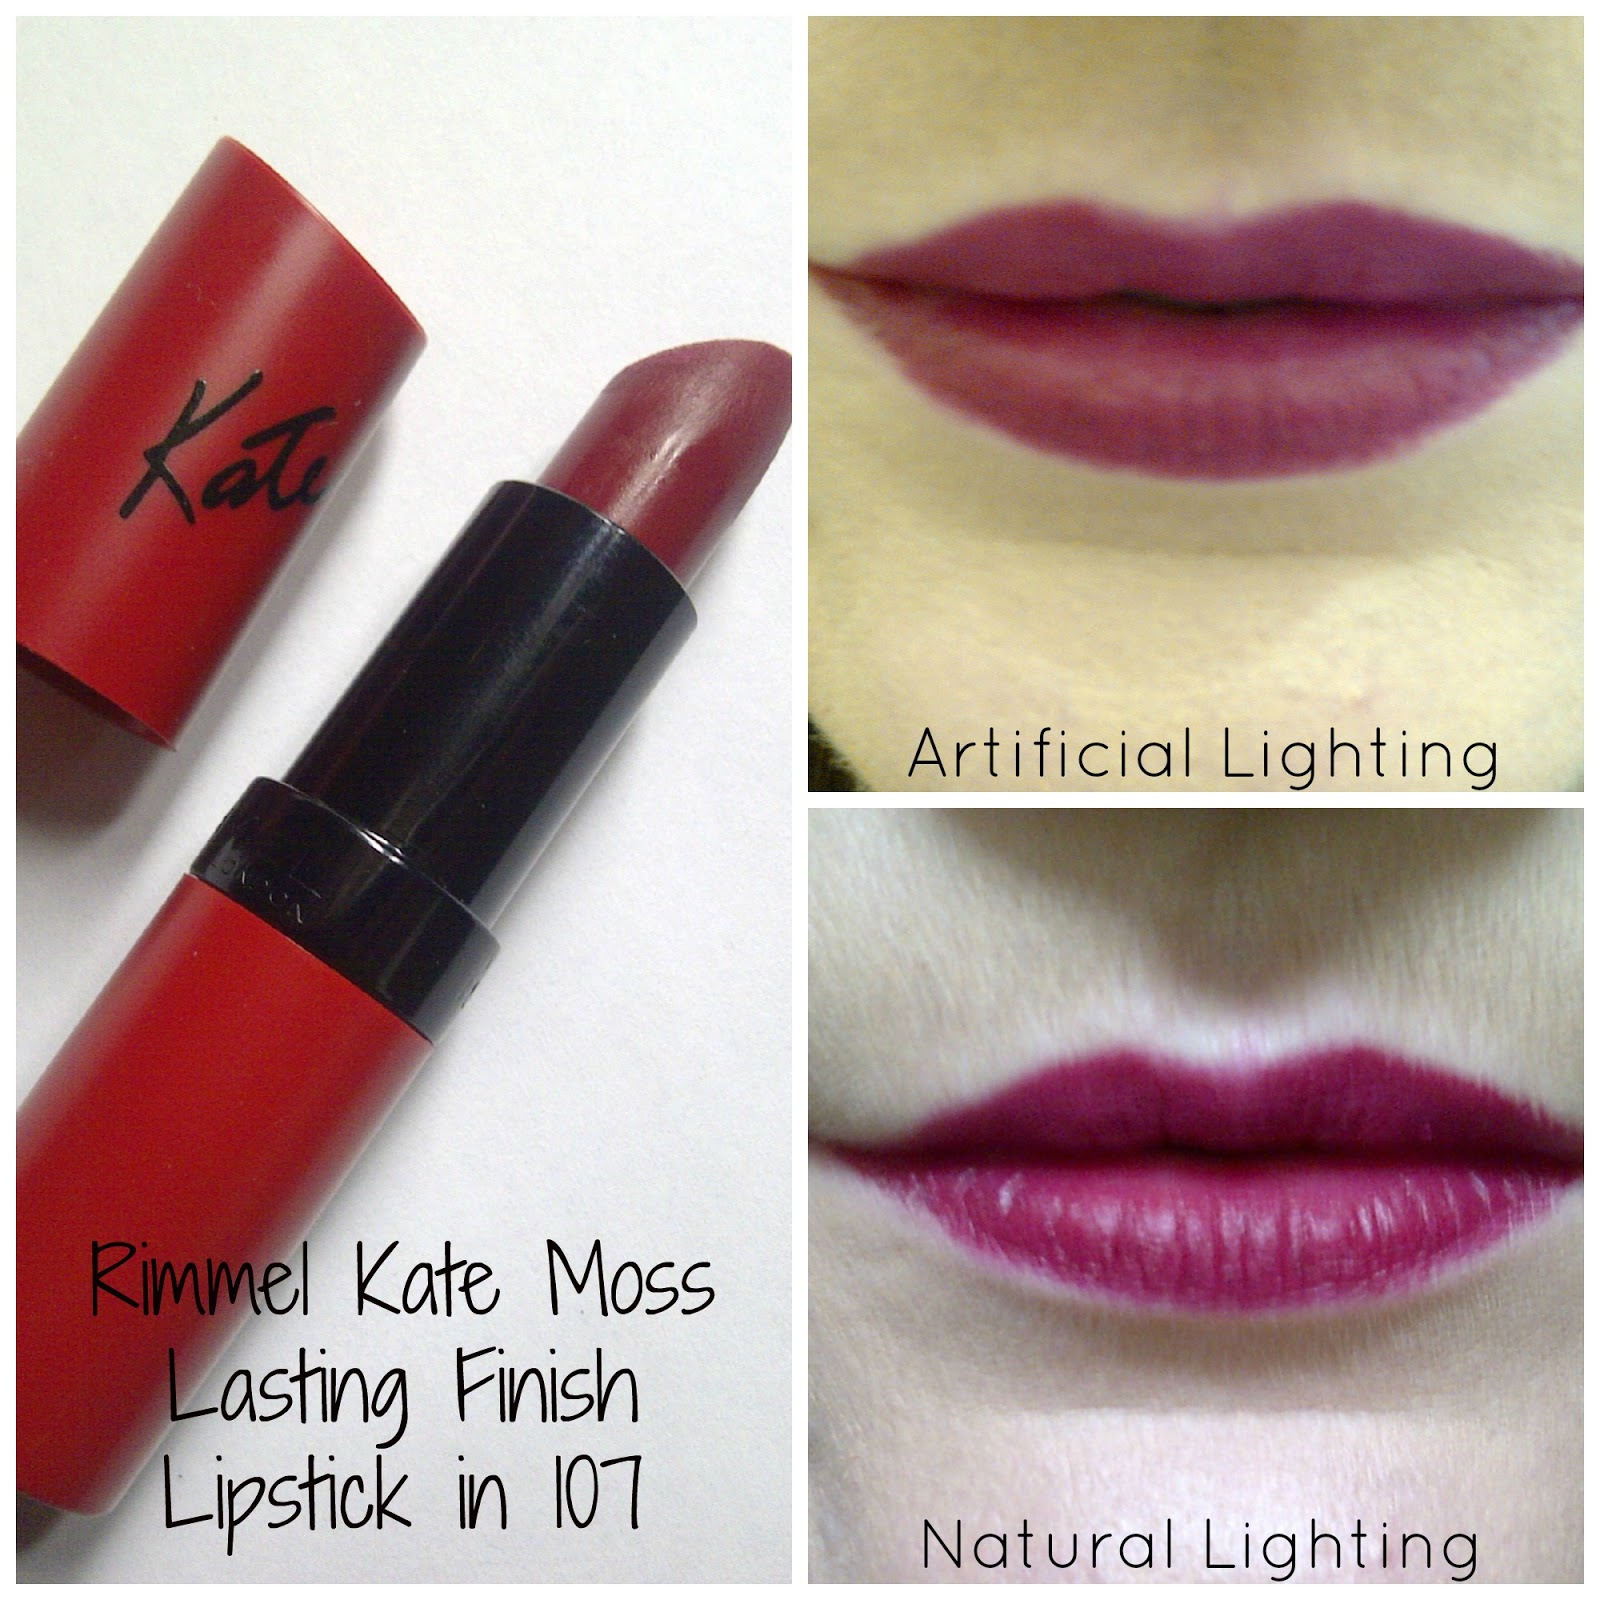 Rimmel Kate Moss Lasting Finish Lipstick In 107 Cherries In The Snow